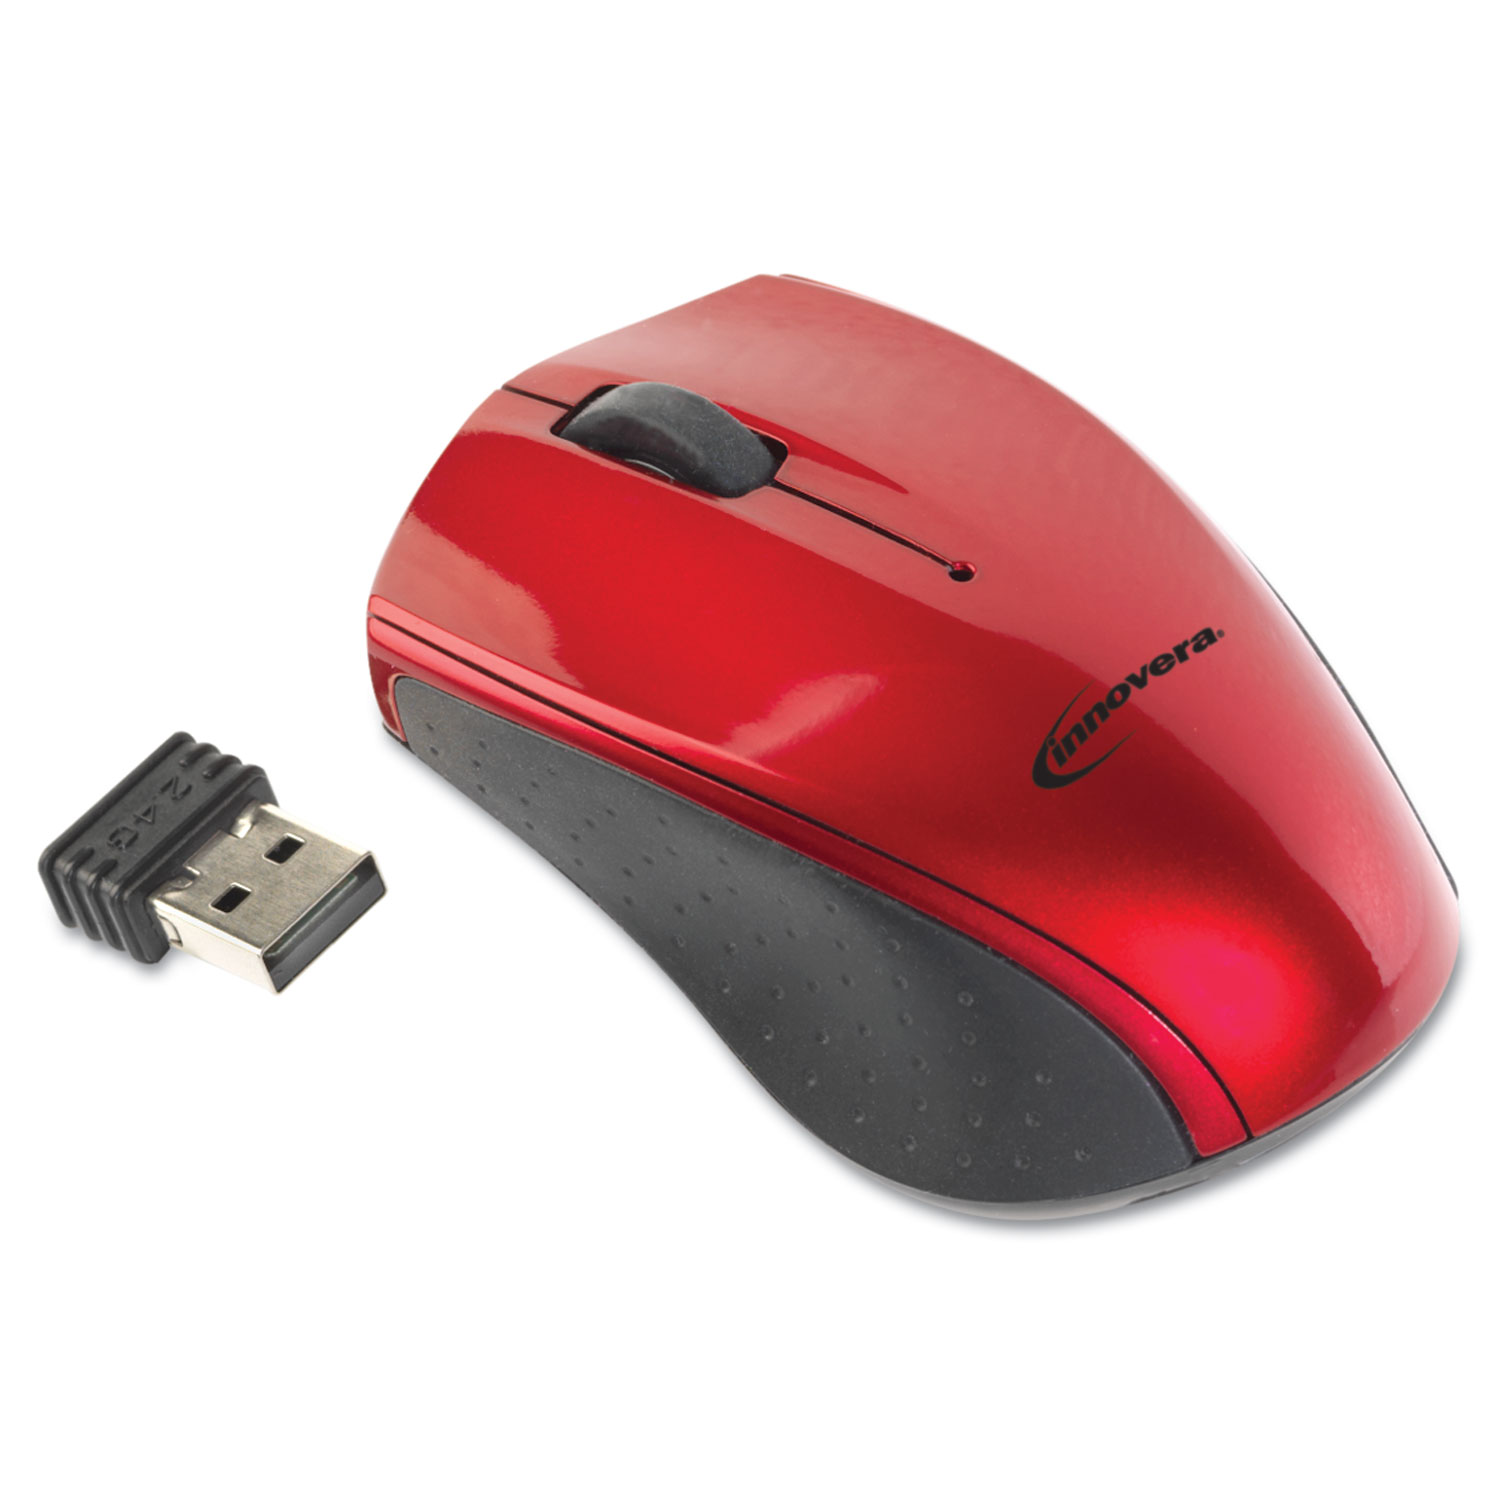  Innovera IVR62204 Mini Wireless Optical Mouse, 2.4 GHz Frequency/30 ft Wireless Range, Left/Right Hand Use, Red/Black (IVR62204) 